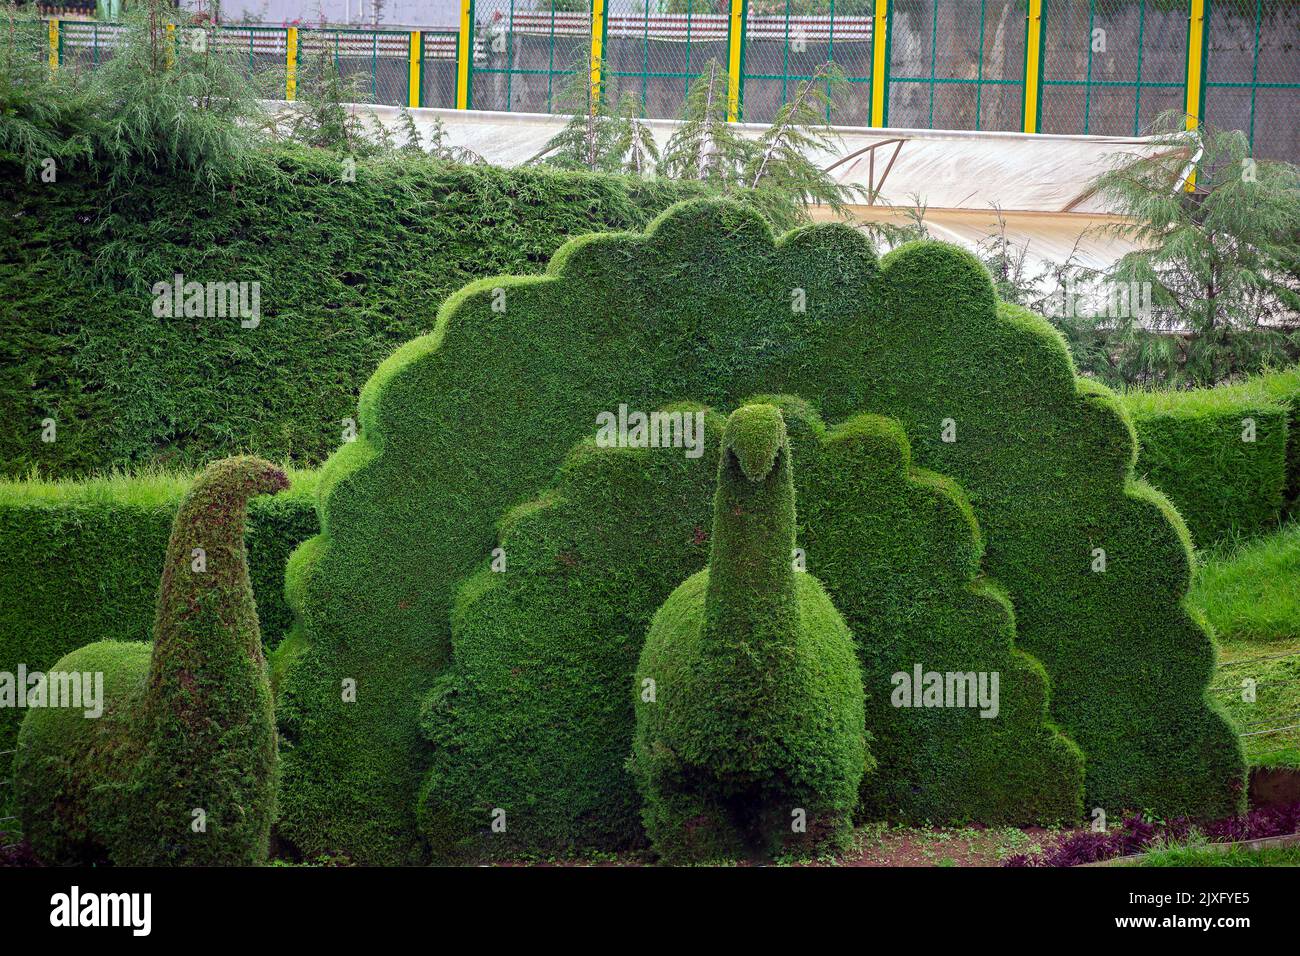 peacock and Dino figure created from bushes in park Stock Photo